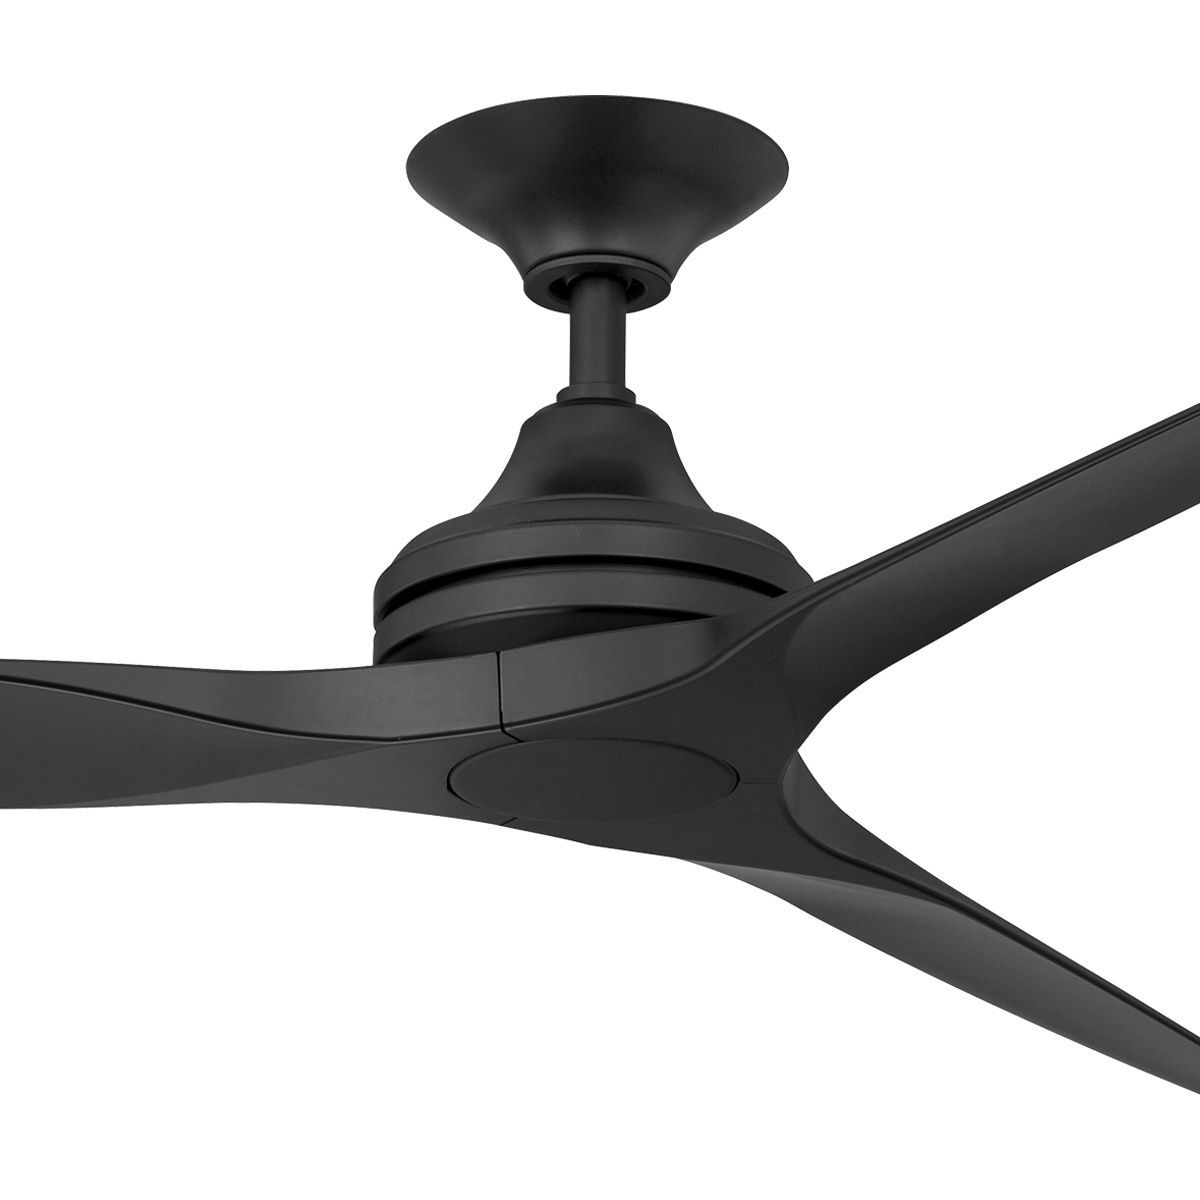 Spitfire 3 Blade Ceiling Fans Regarding 2019 Threesixty Spitfire V2 60" All Weather Polymer 3 Blades (View 18 of 20)